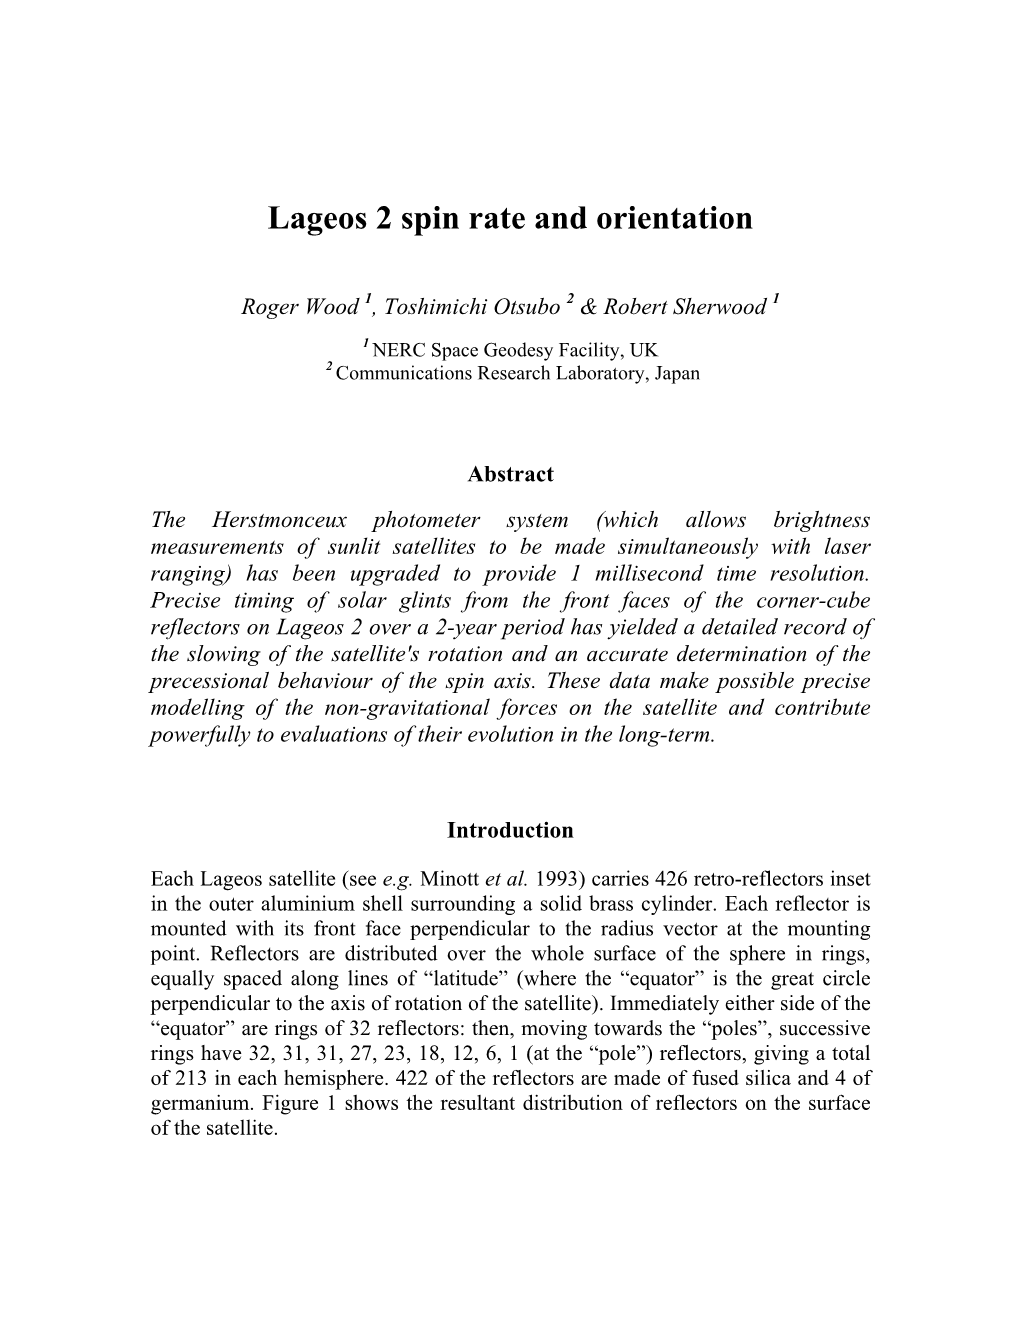 Lageos 2 Spin Rate and Orientation